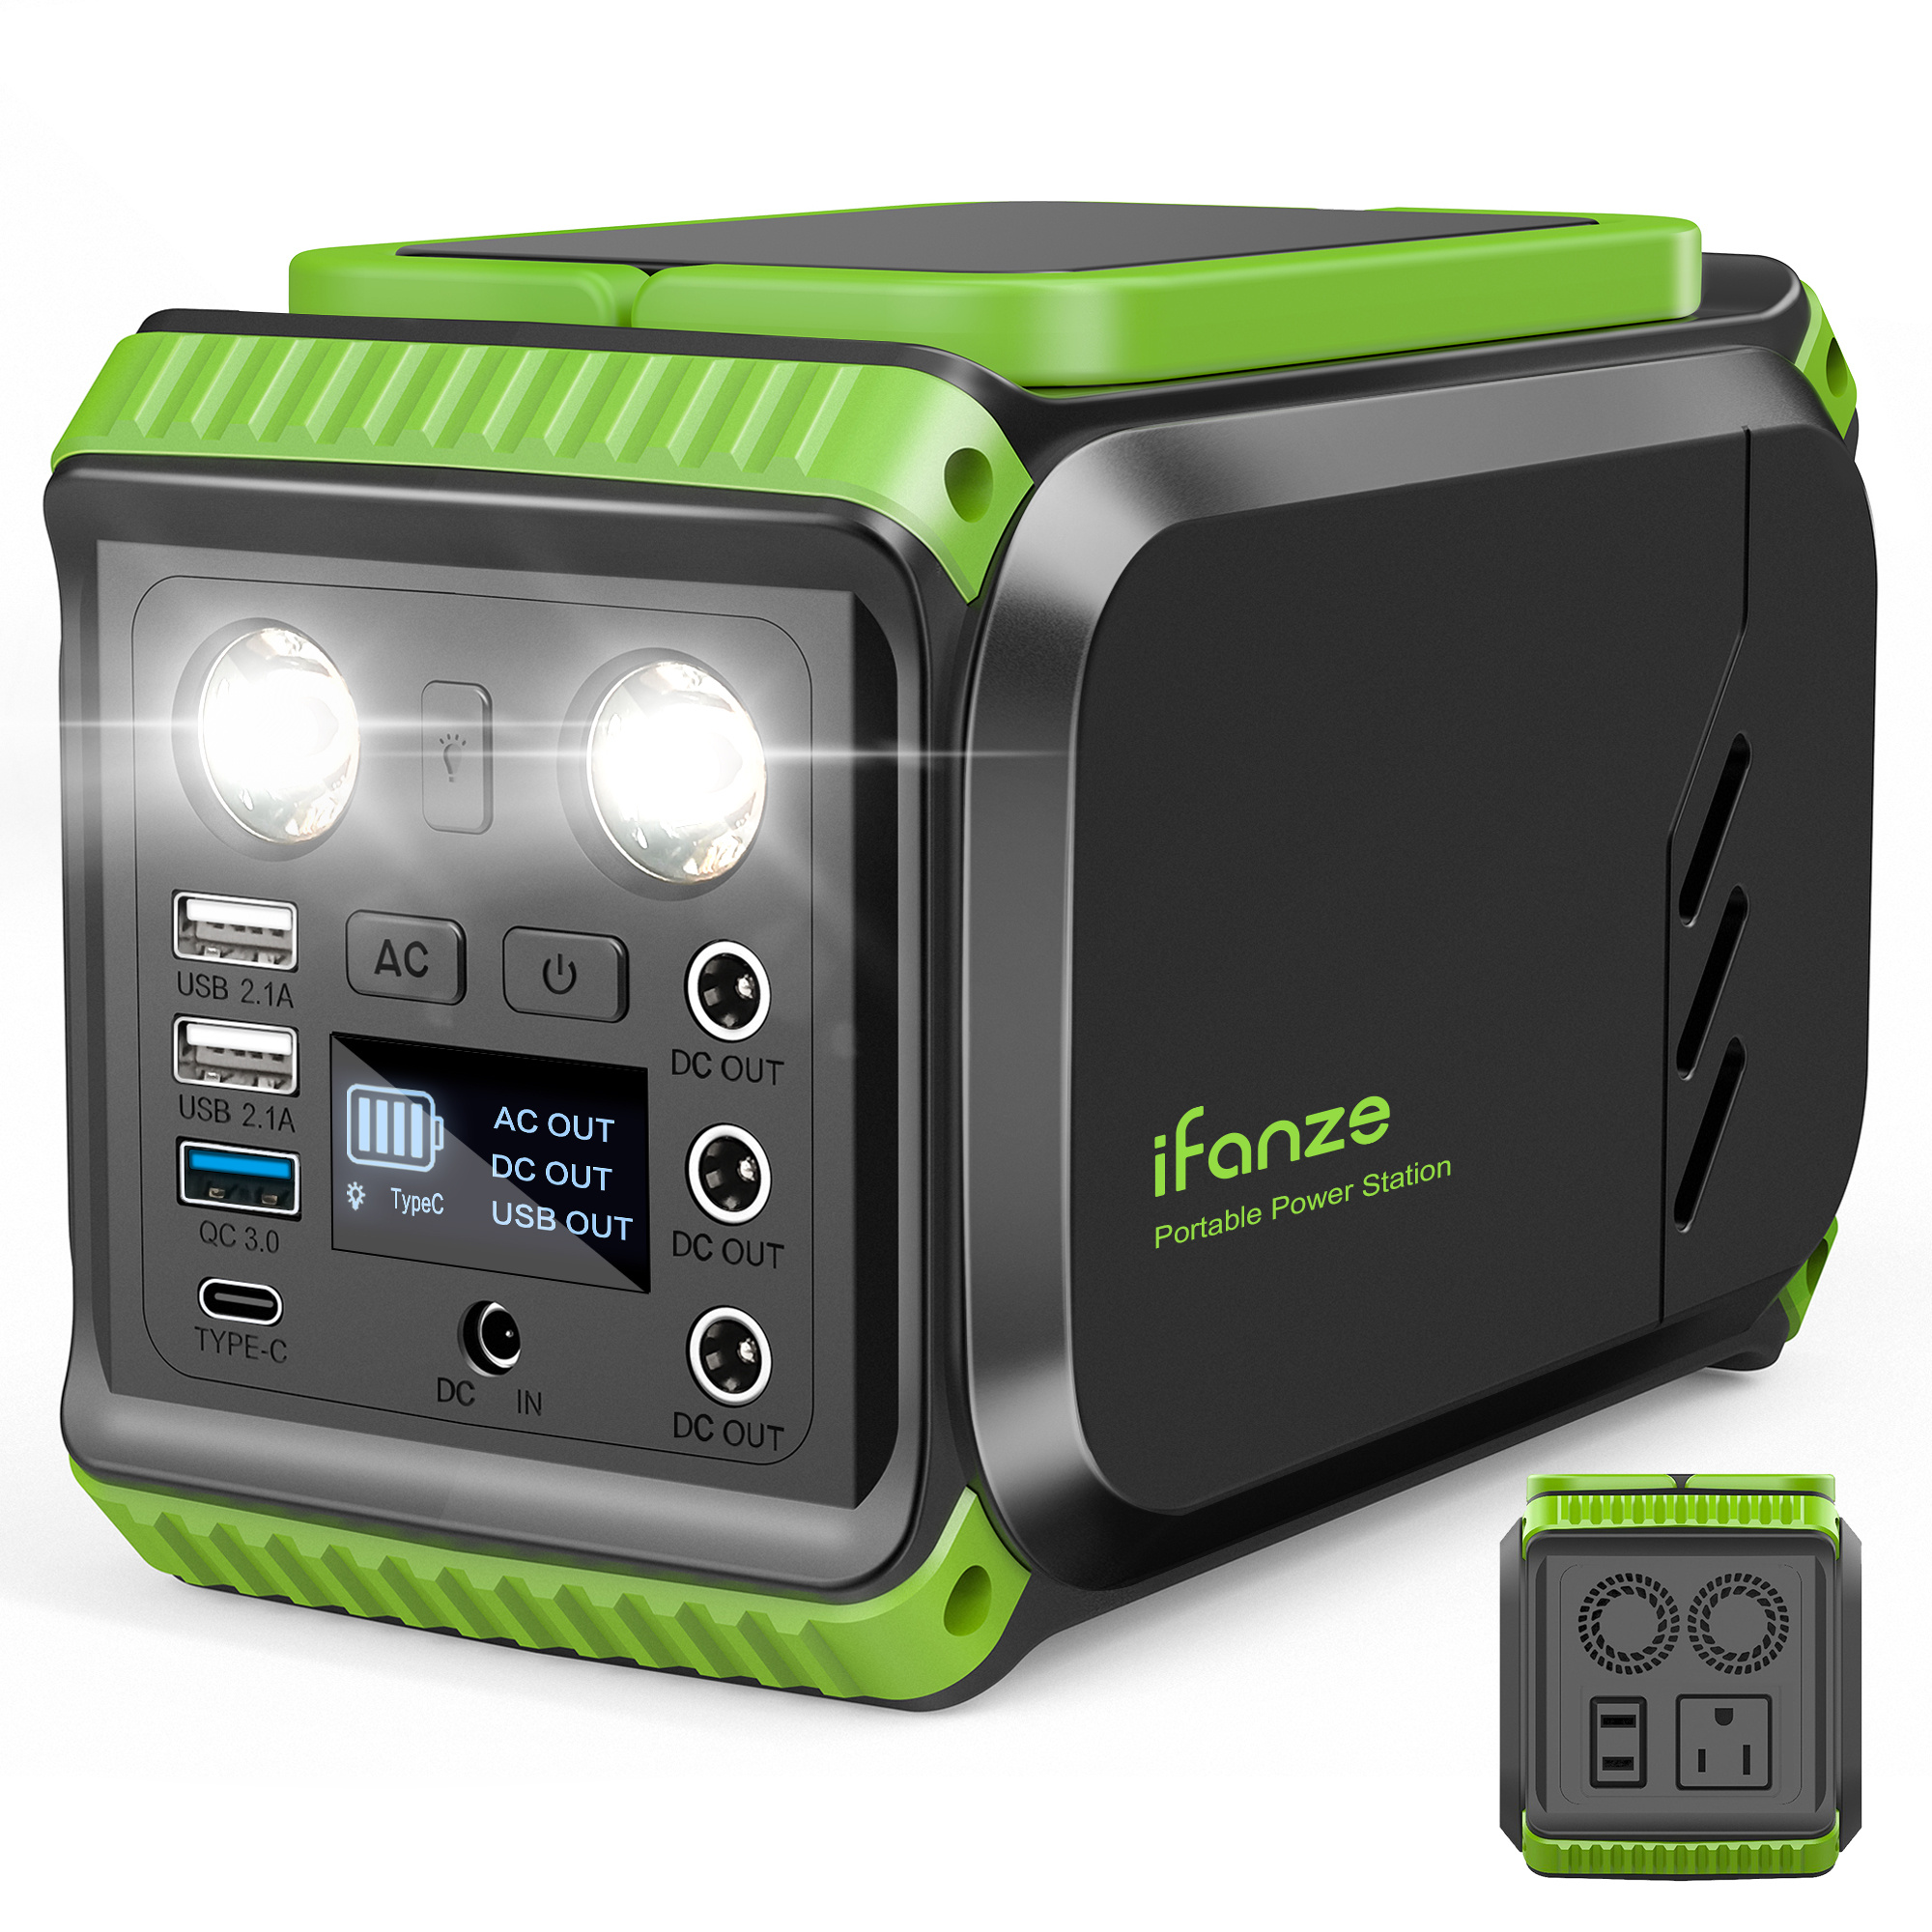 iFanze 200W Portable Power Station, 148Wh 40000mAh Solar Generator Power Supply with 110V AC Outlets & LED Light, Backup Battery for CPAP, Home Emergency, Outdoor Camping, Road Travel, Hunting, RV - image 1 of 12